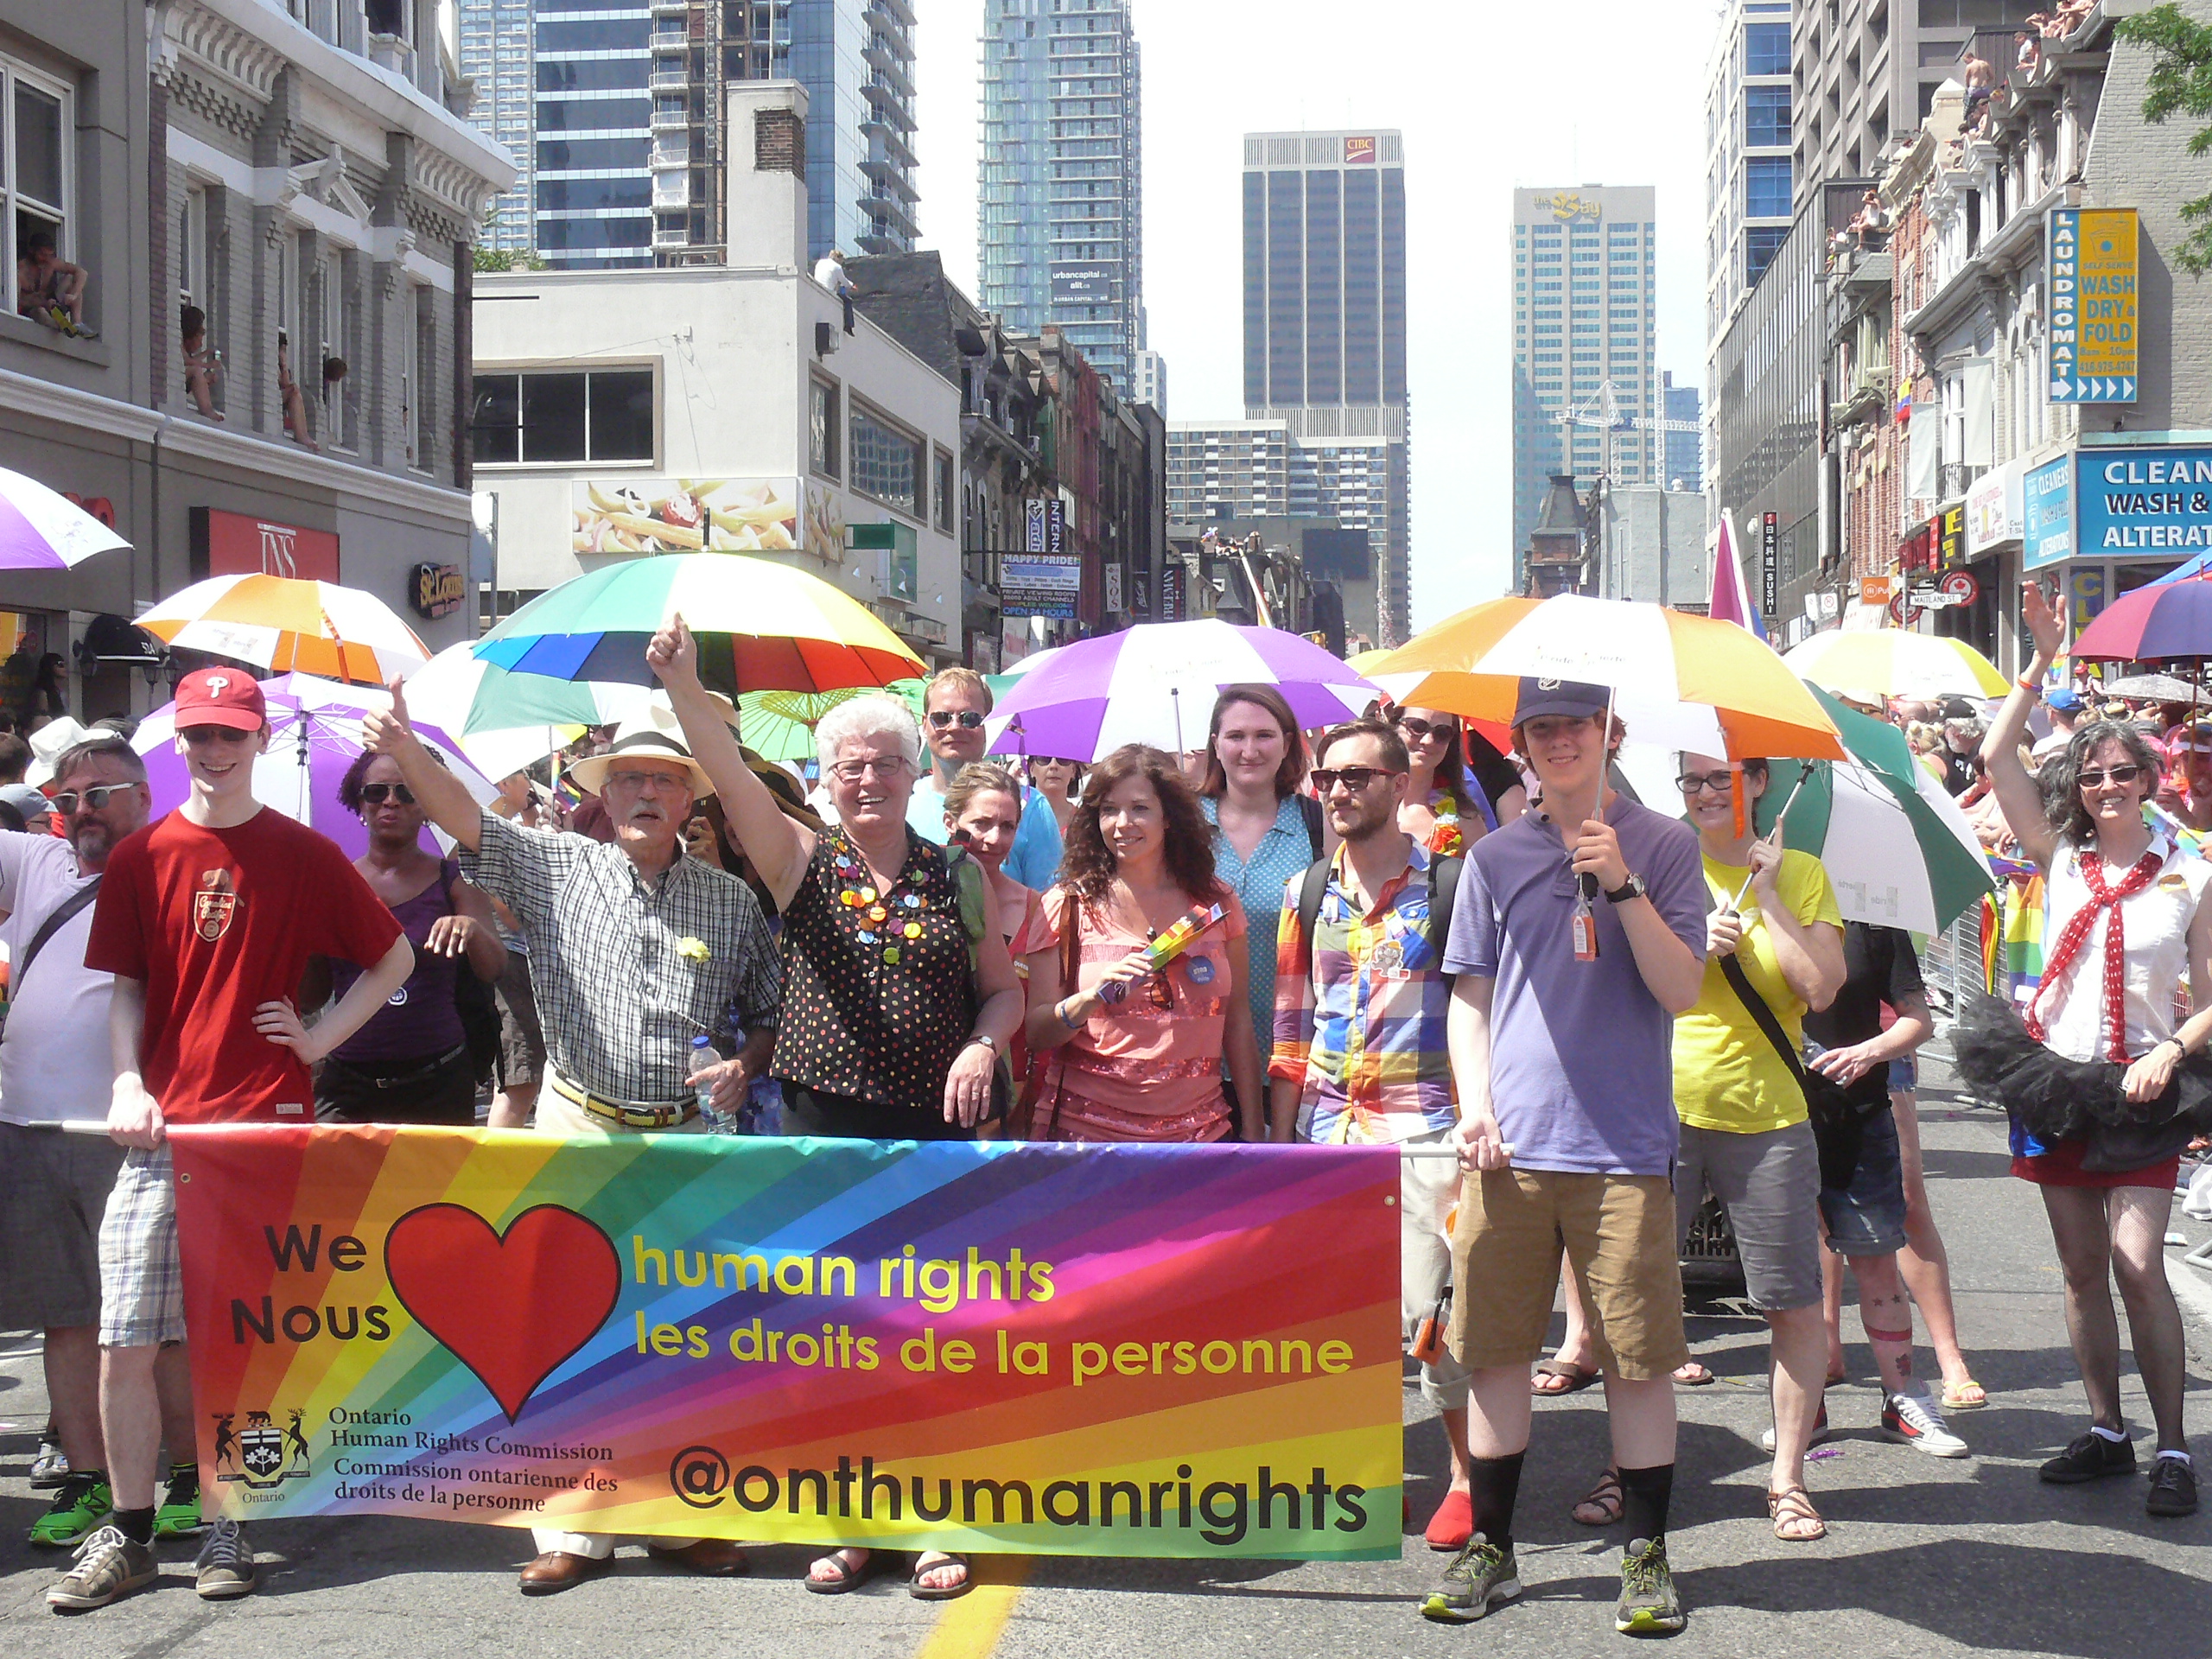 Chief Commissioner Barbara Hall, her husband Max, OHRC staff, family and friends march behind a large, colourful OHRC banner that says “We heart human rights” at the Pride parade.